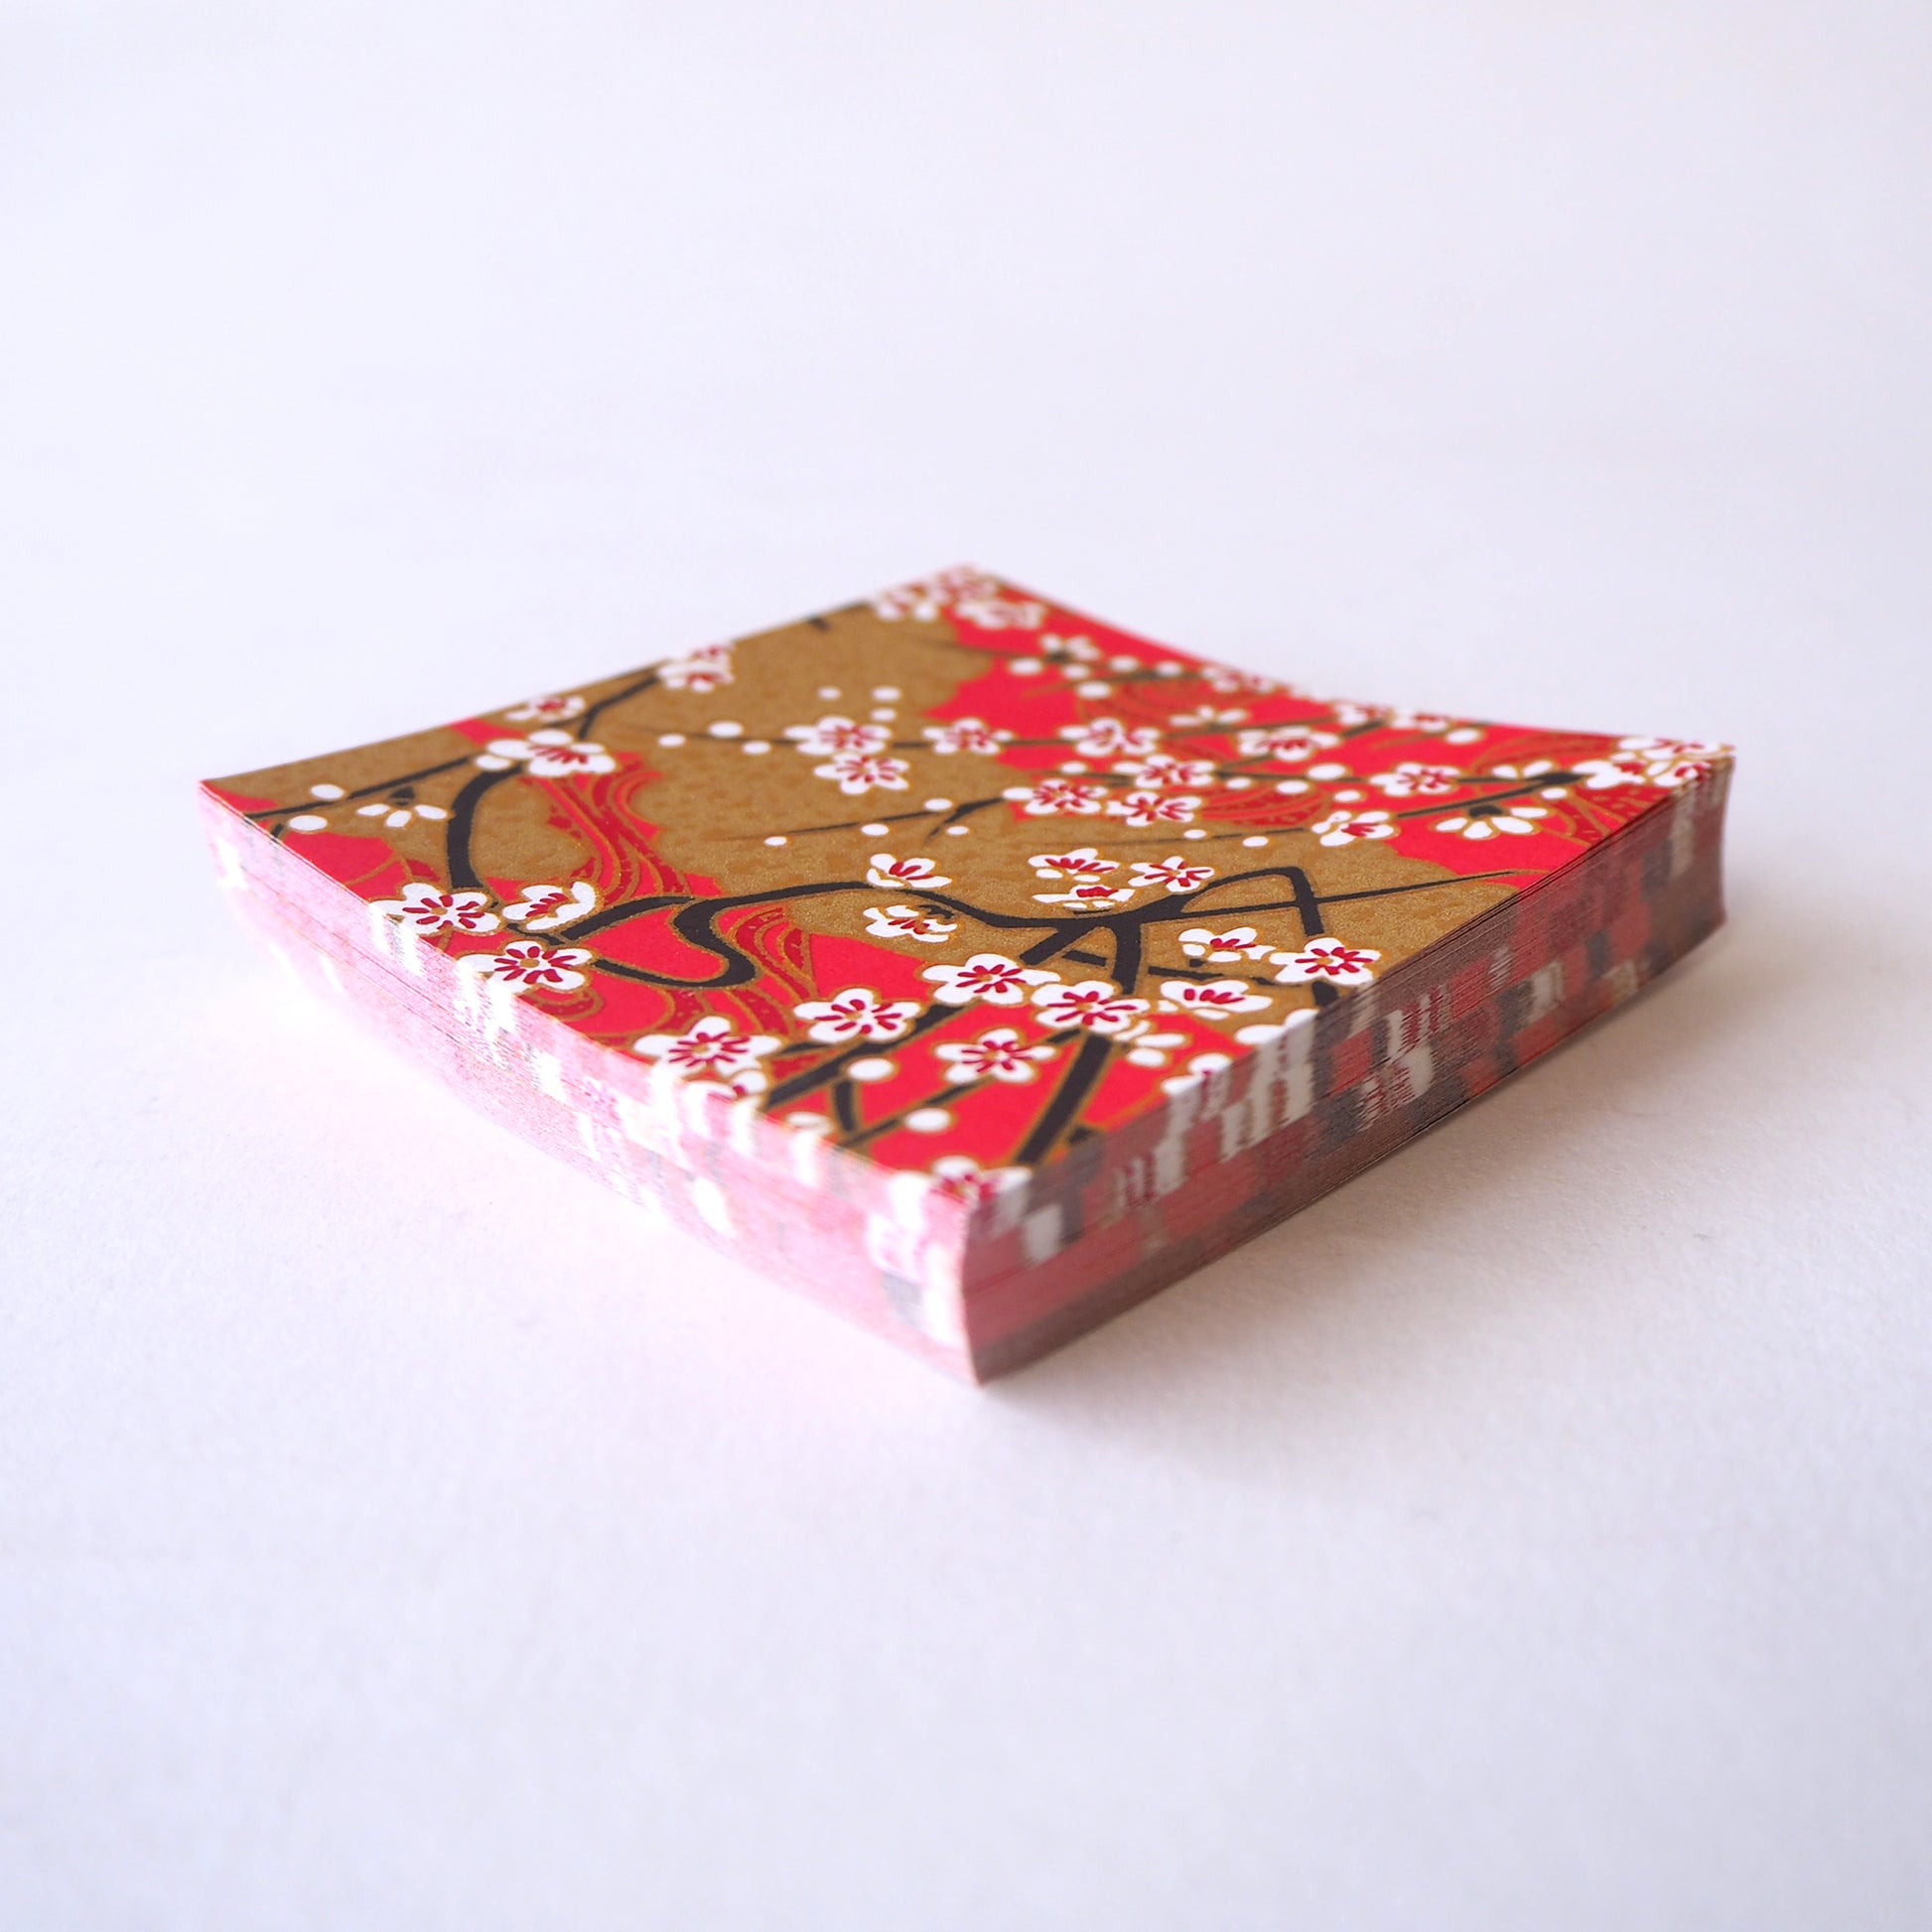 Pack of 100 Sheets 7x7cm Yuzen Washi Origami Paper HZ-383 - Cherry Blossom & Gold Clouds Red - washi paper - Lavender Home London